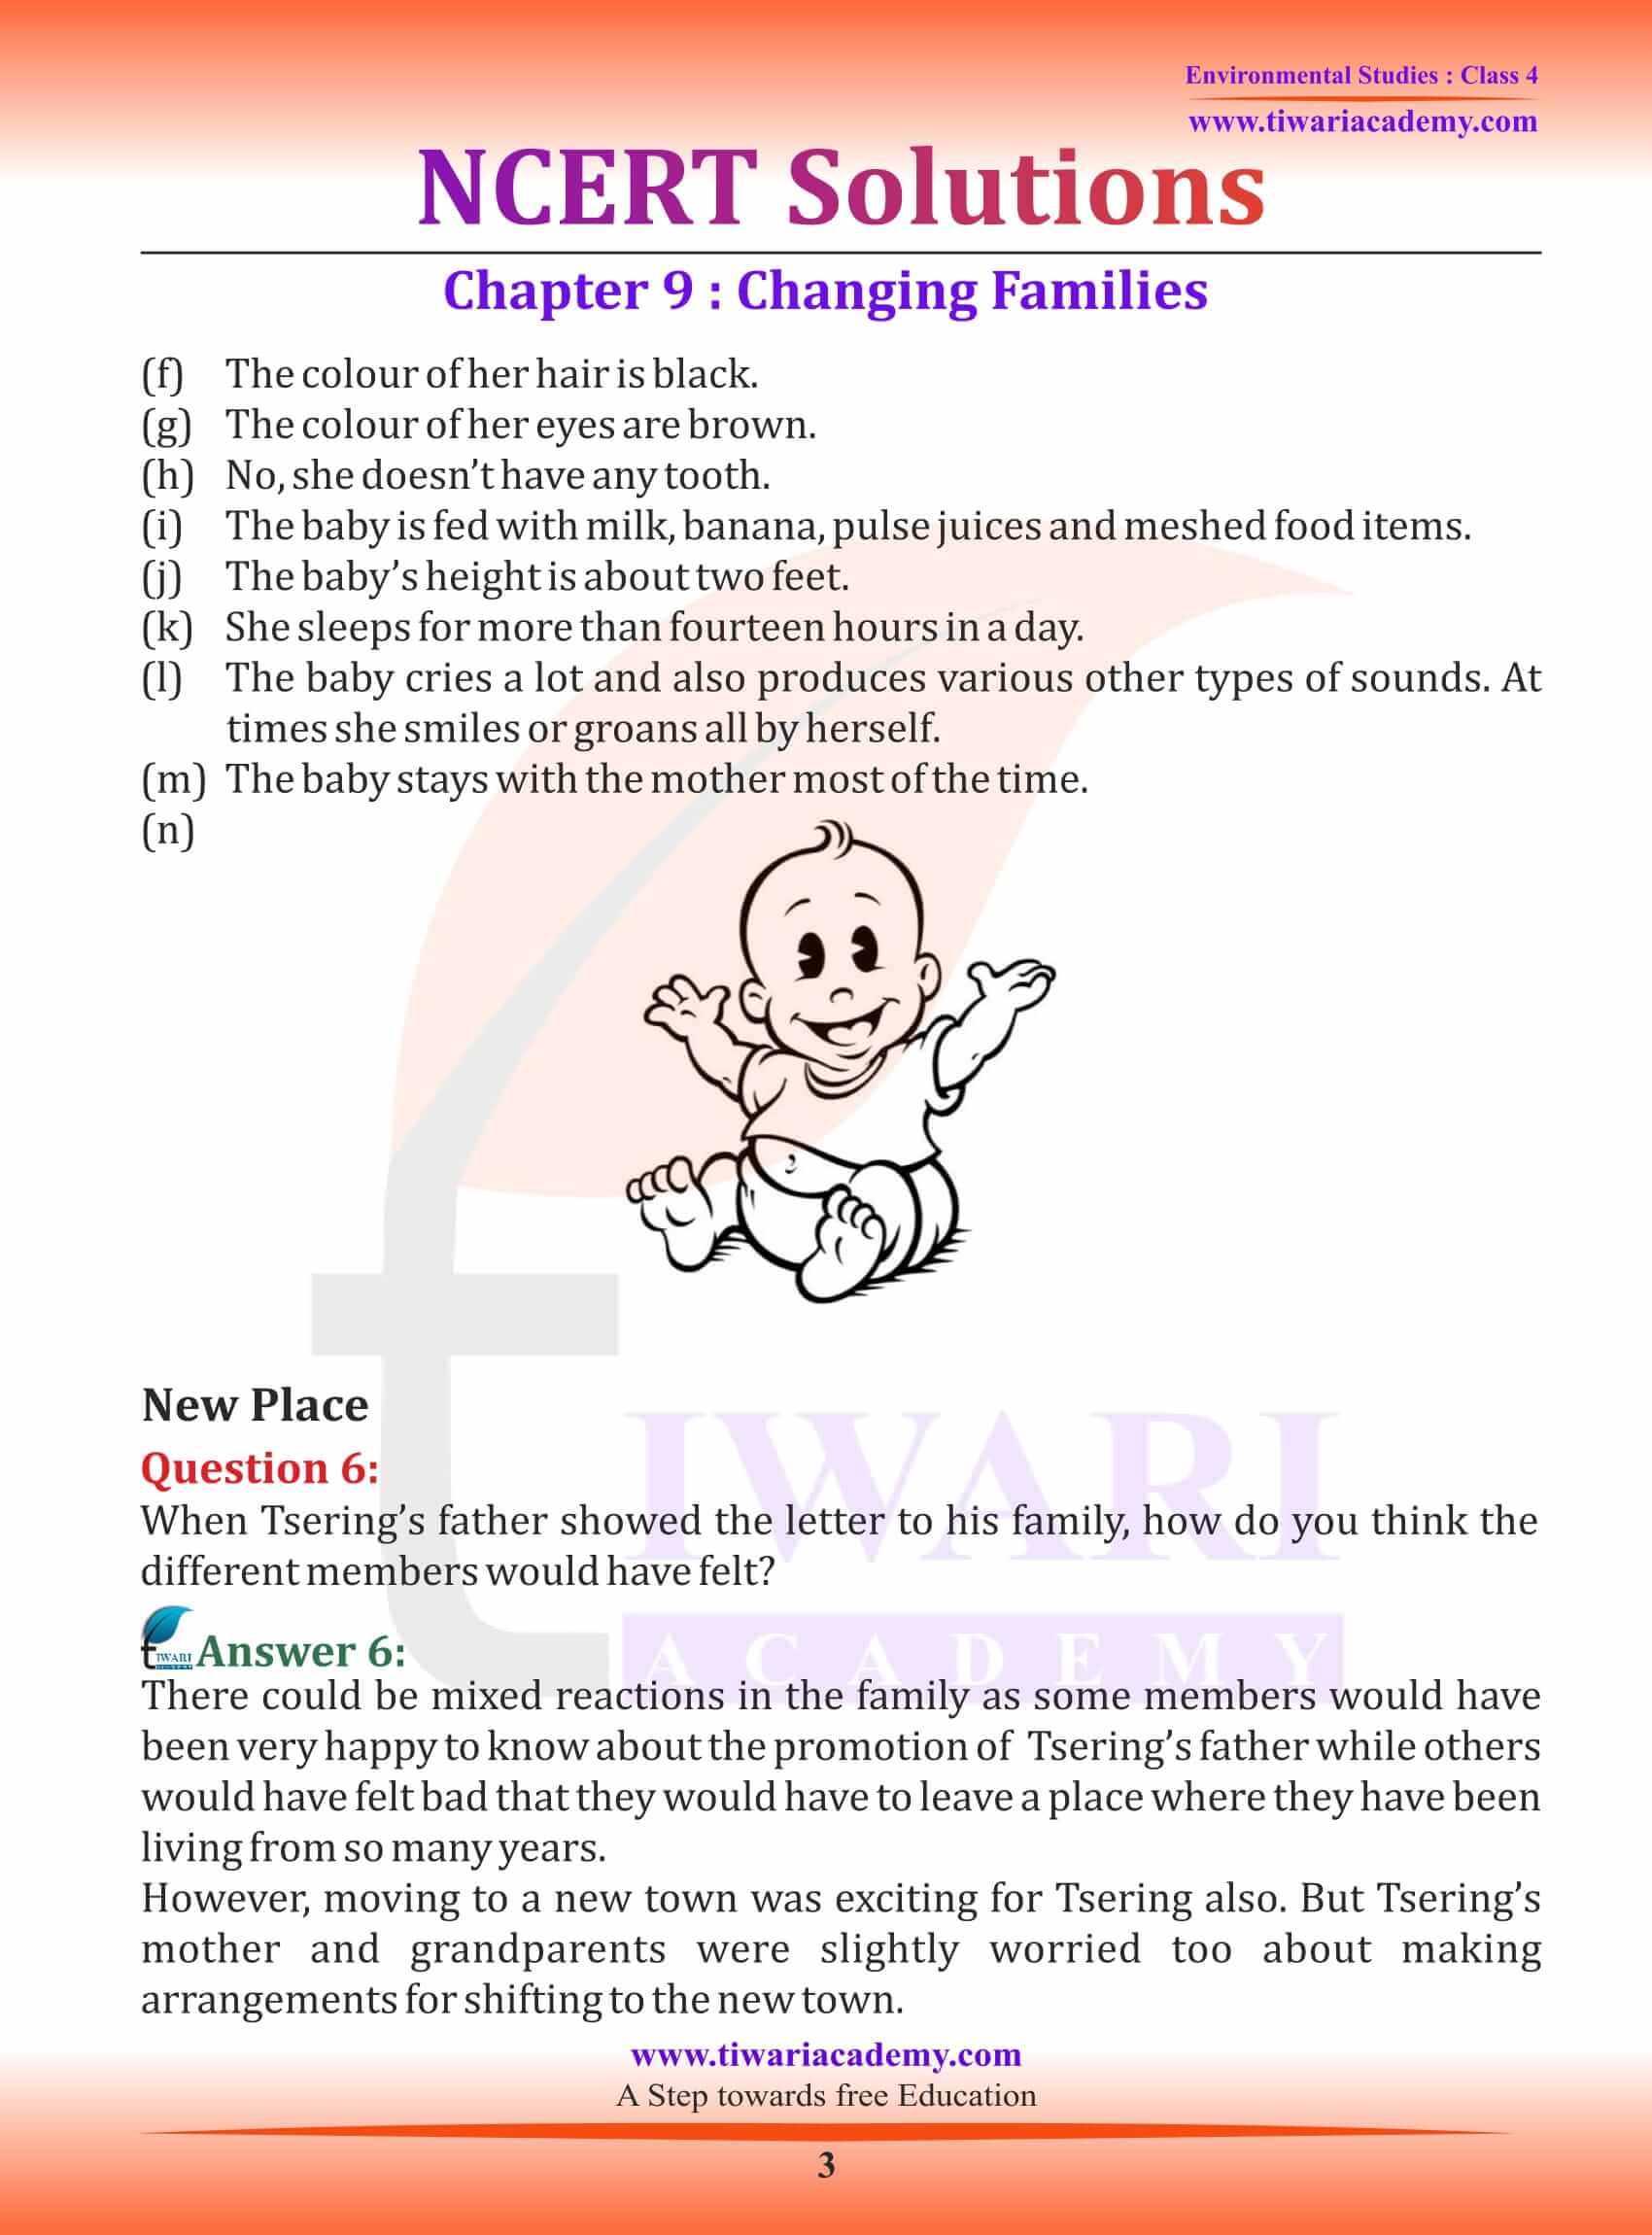 NCERT Solutions for Class 4 EVS Chapter 9